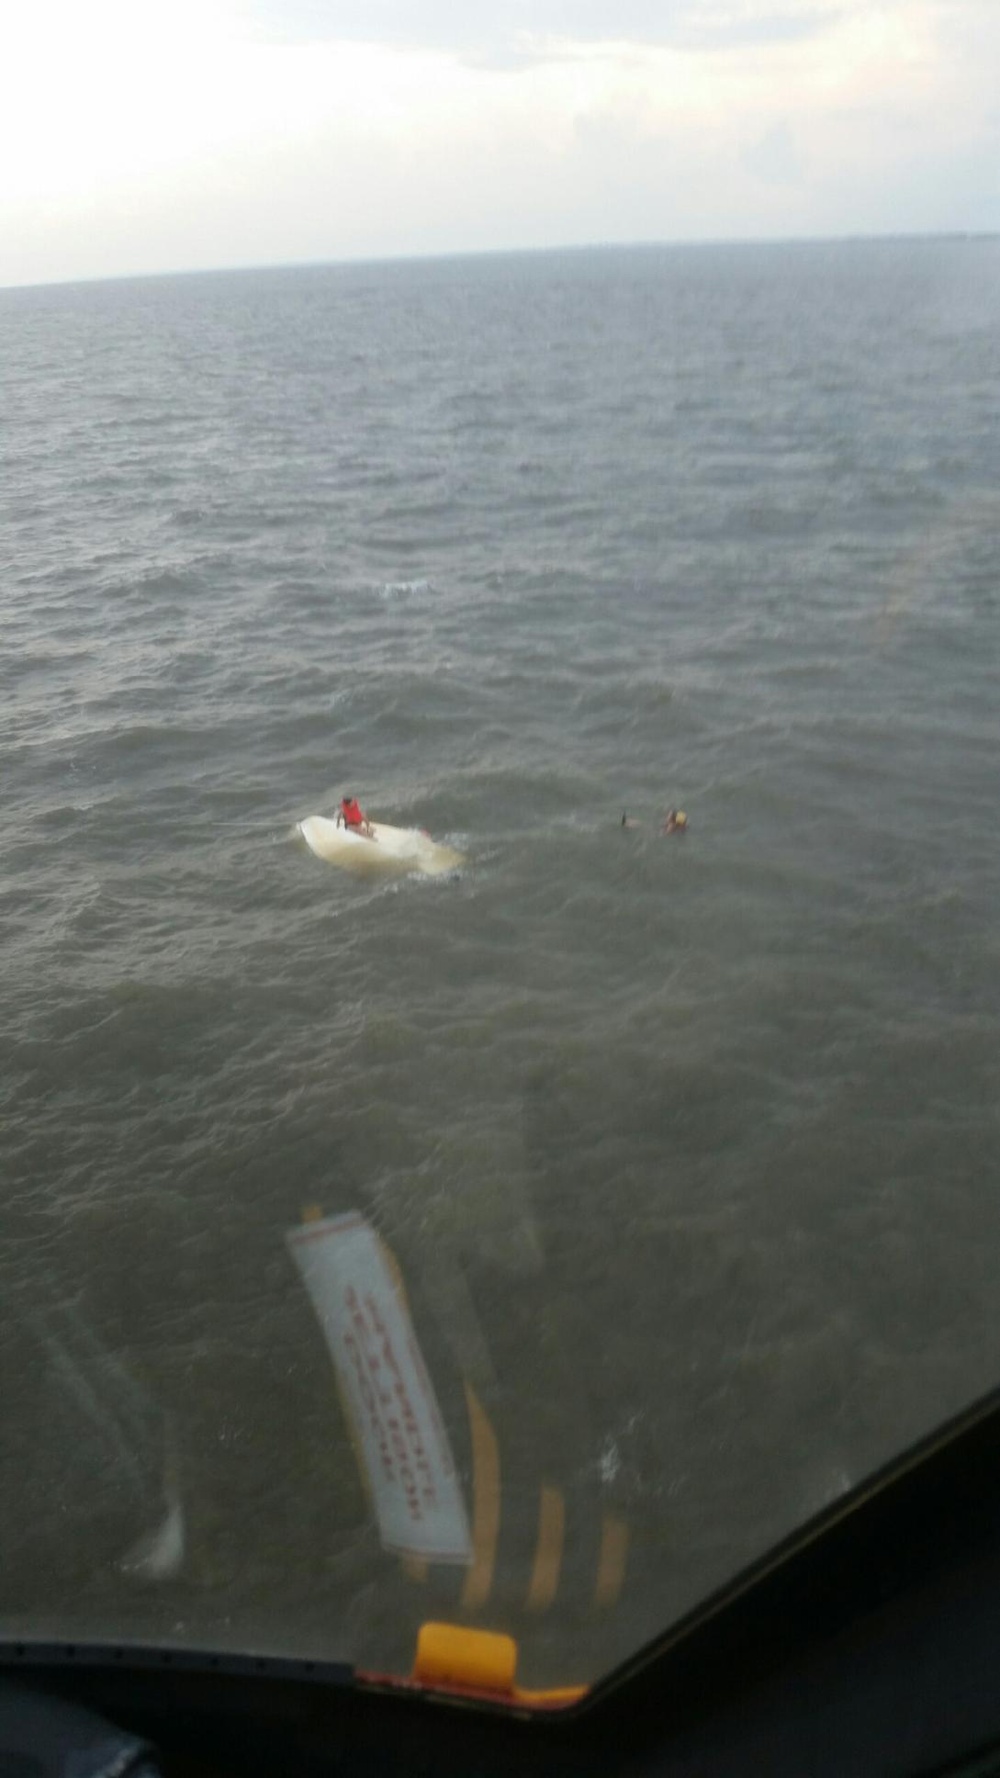 Mother, daughter rescued after boat capsizes off St. Simons Island